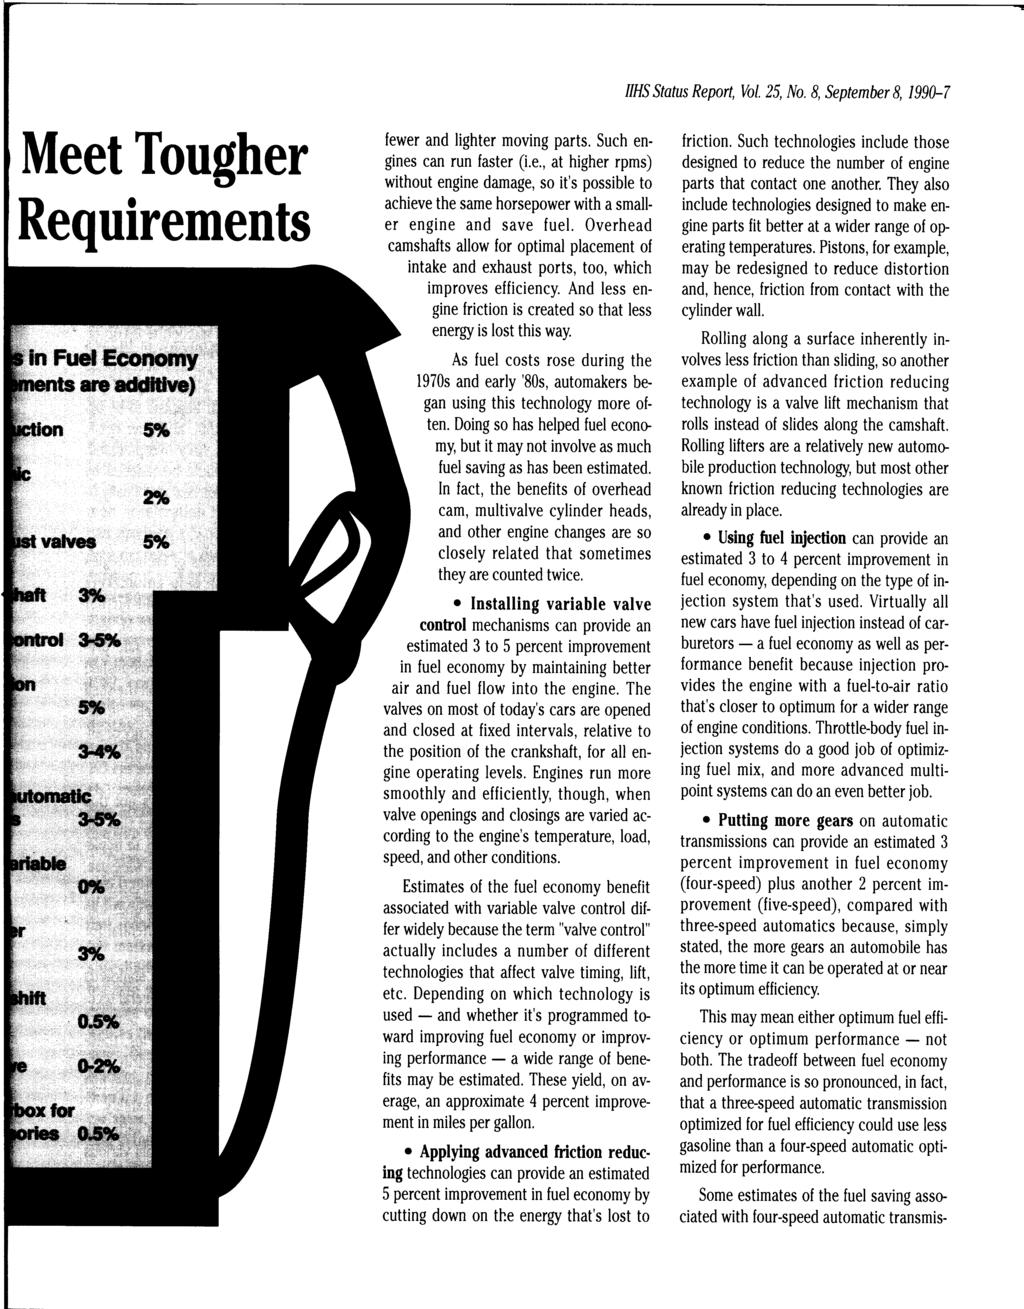 IIHSStatus Report, Vol. 25, No. 8, Septembers, 1990-7 Meet Tougher Requirements in Fuel Economy Jftii 5% fewer and lighter moving parts. Such engines can run faster (i.e., at higher rpms) without engine damage, so it's possible to achieve the same horsepower with a smaller engine and save fuel.